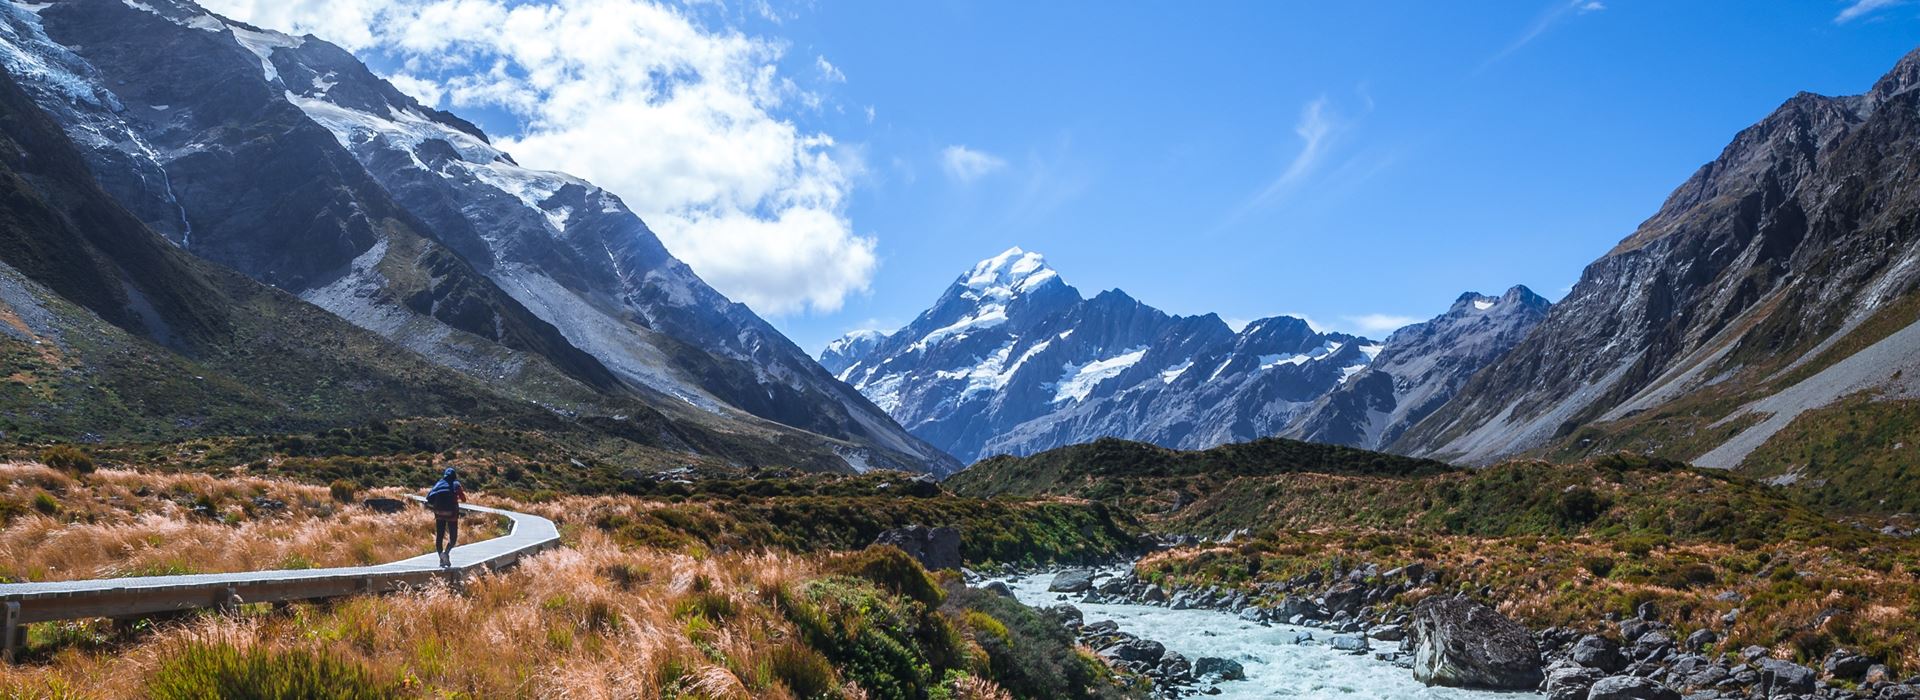 8 Day Tour - Best of Both World's - North & South Island Tour